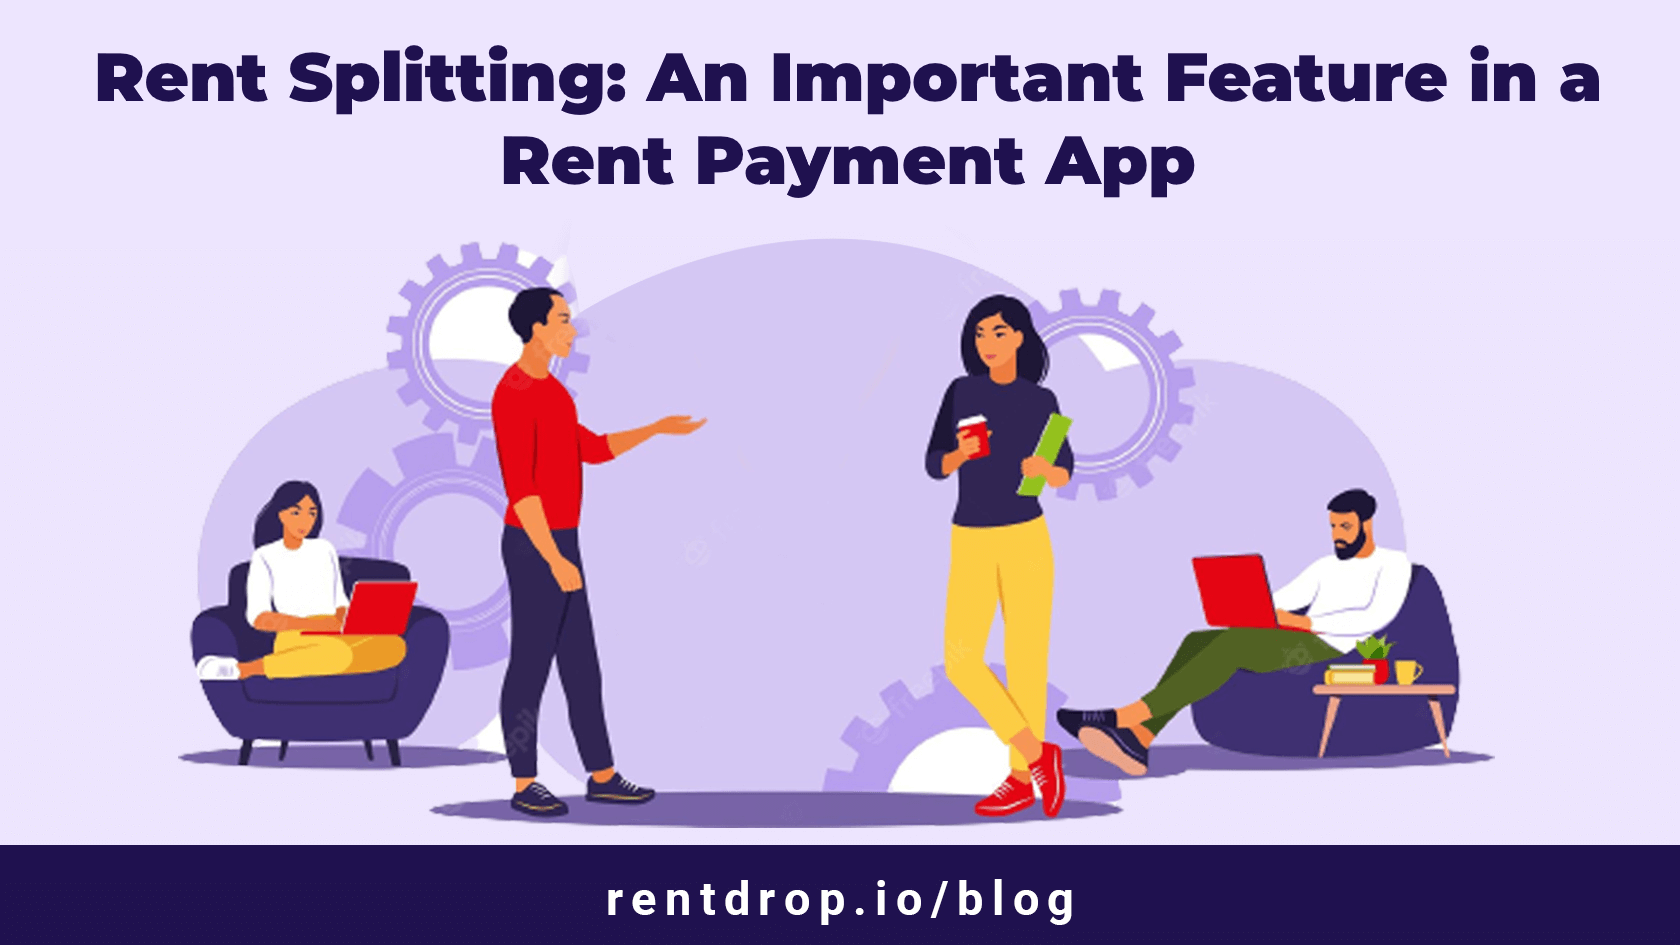 image of Rent Splitting: An Important Feature In a Rent Payment App